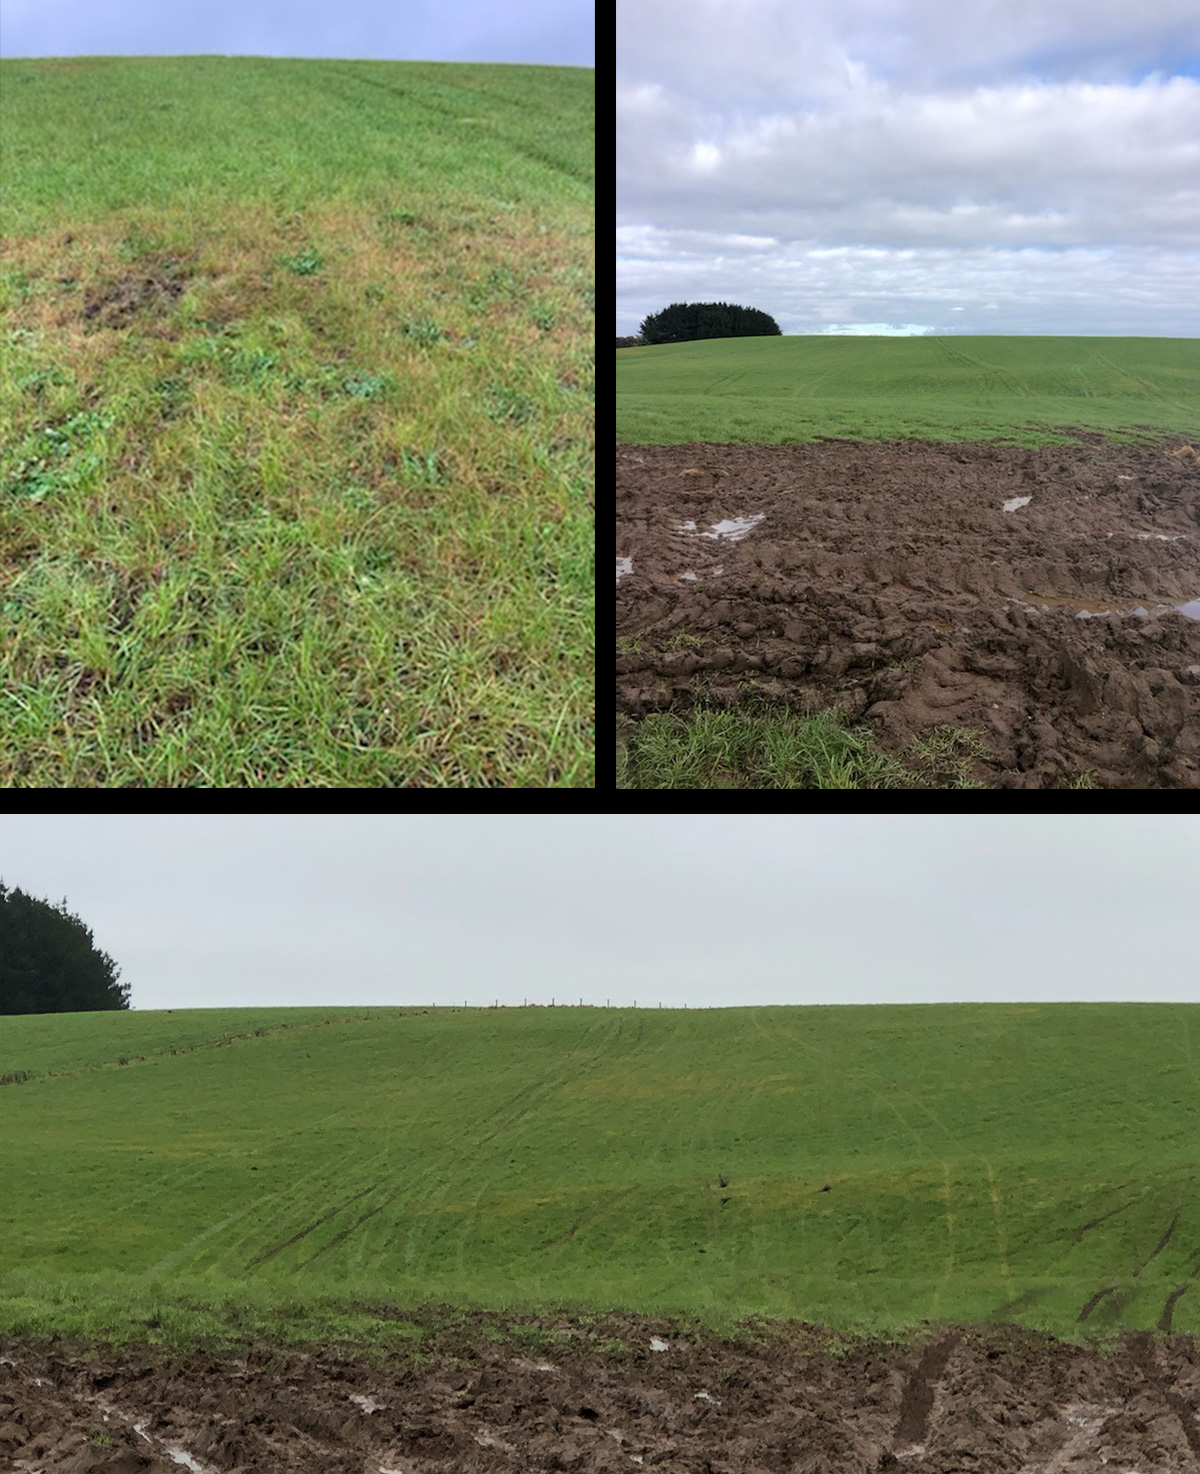 Paddock badly damaged by 3 waves of Grass Grub- restored using BioPest over 3 months: June to August 2021, Southland